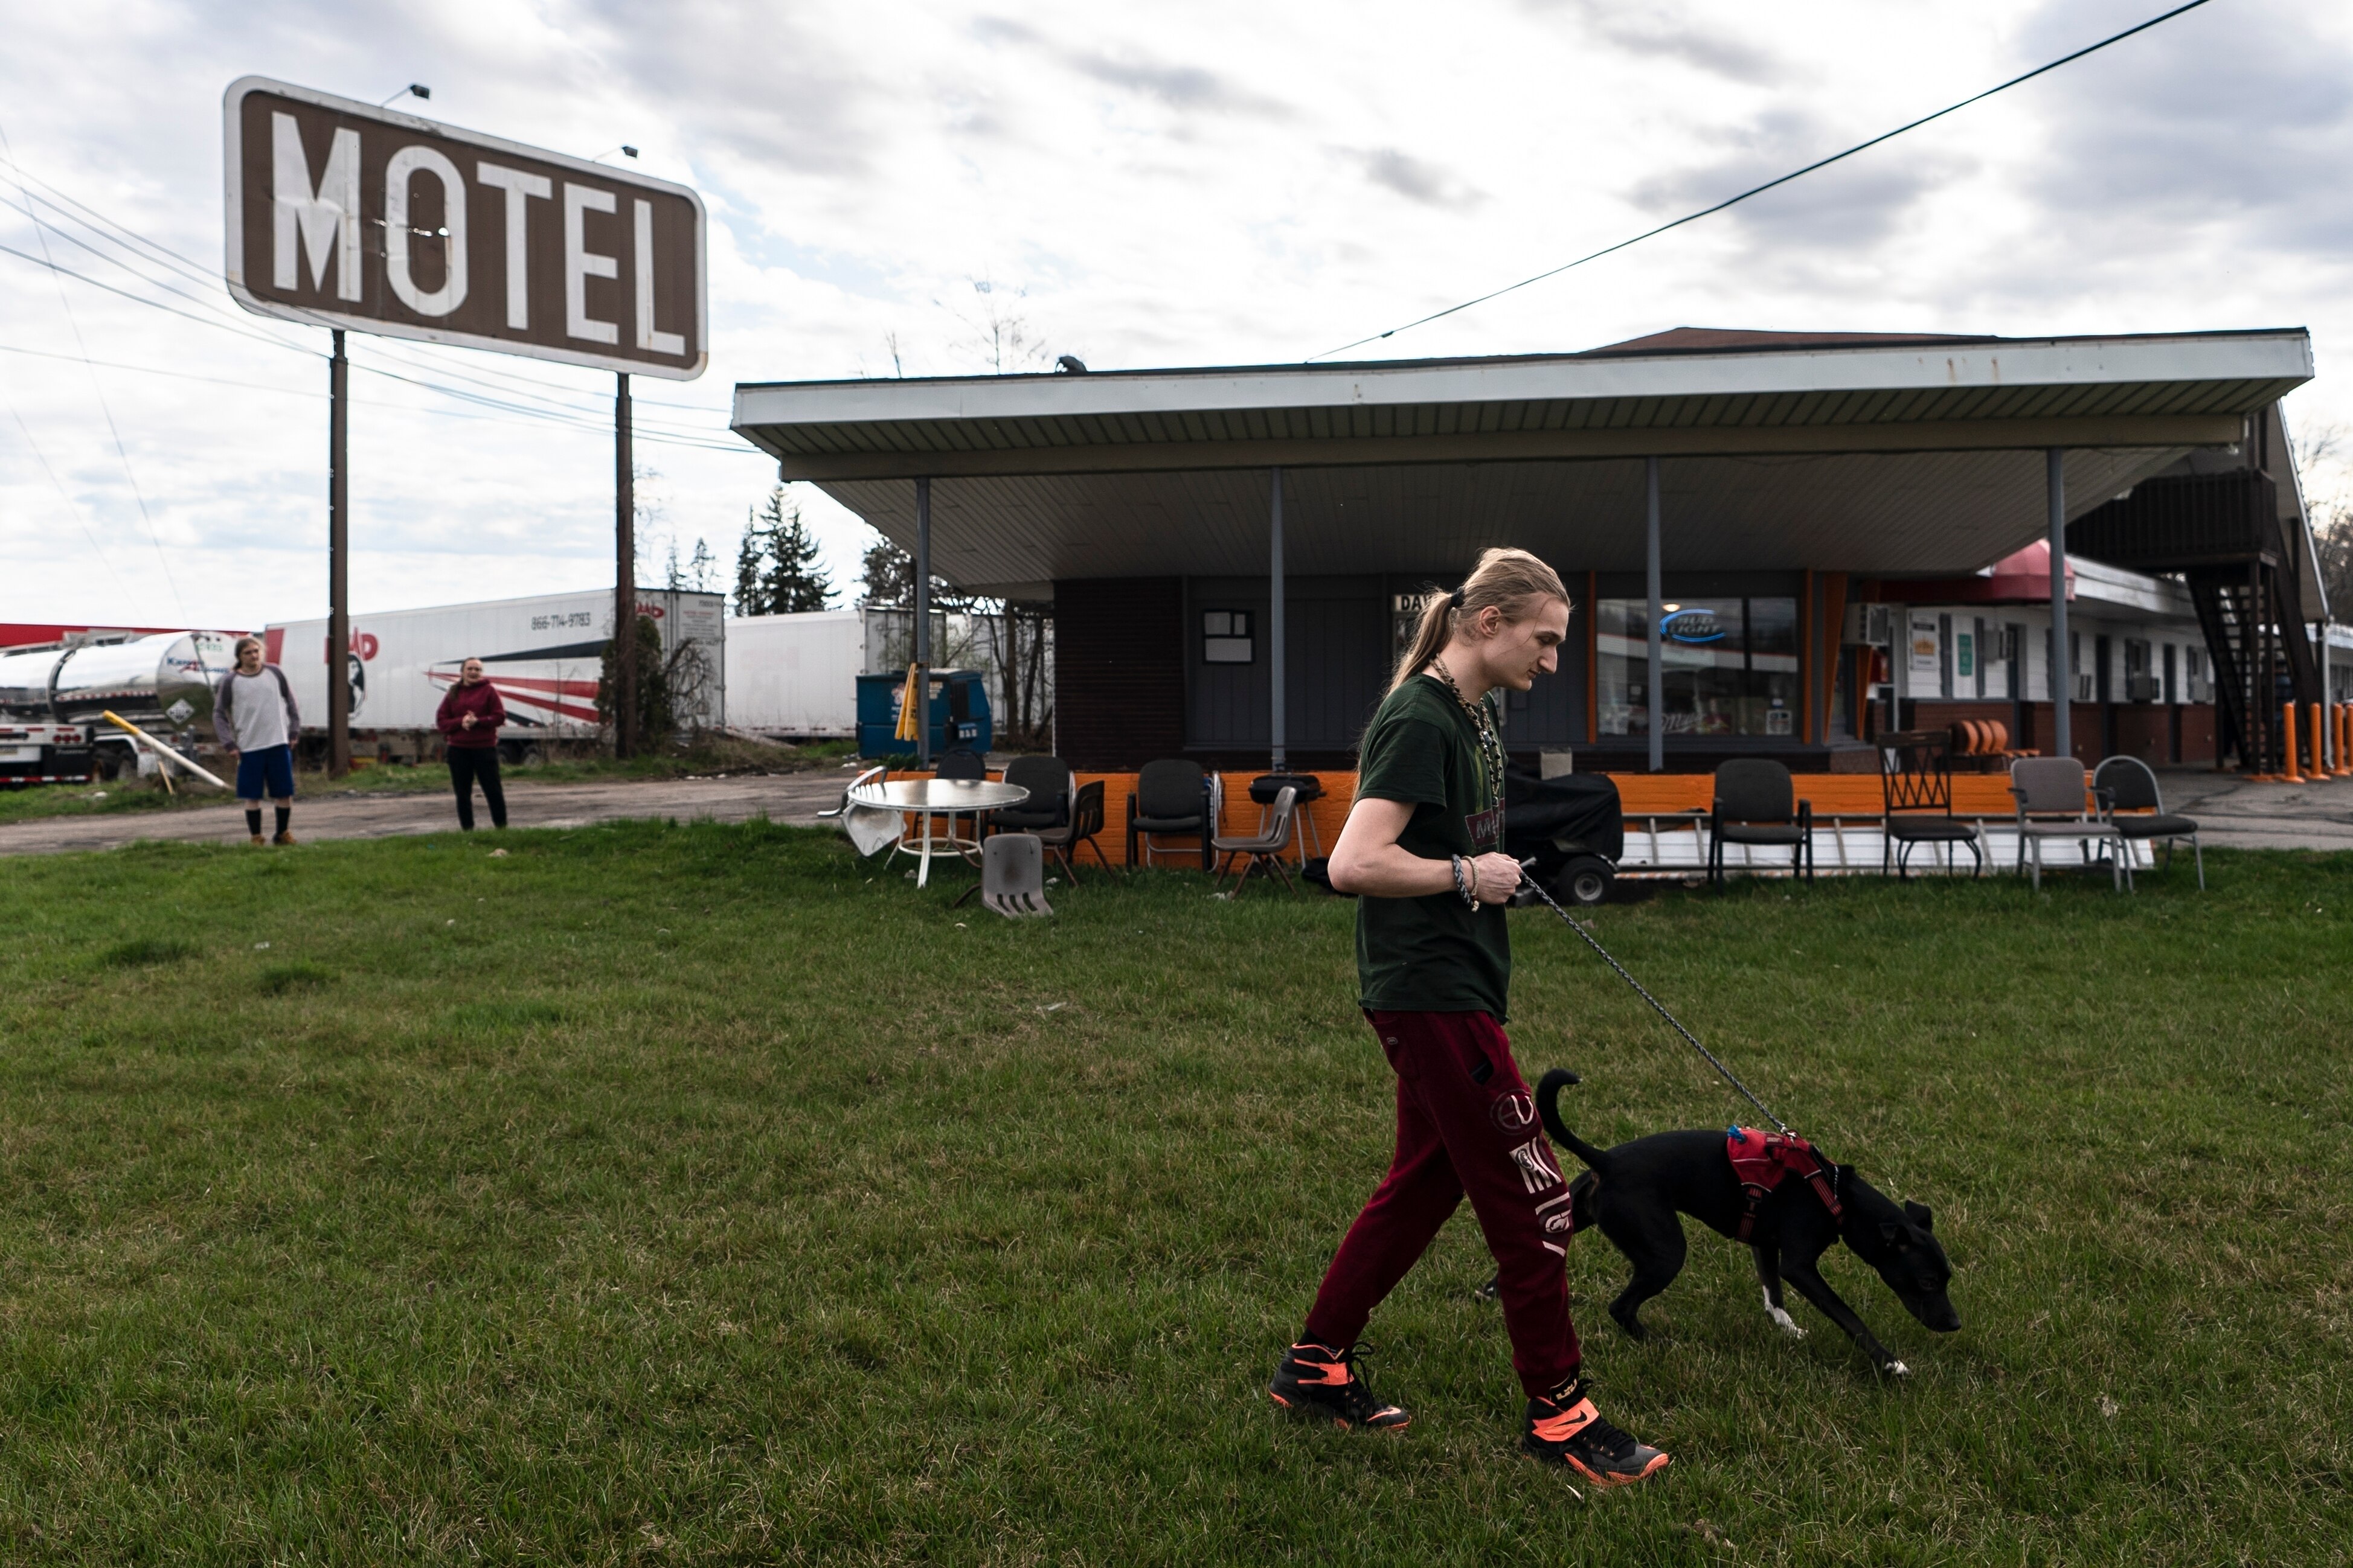 A young white man with long blonde hair in a ponytail walks a black dog on a patch of grass next to a motel.